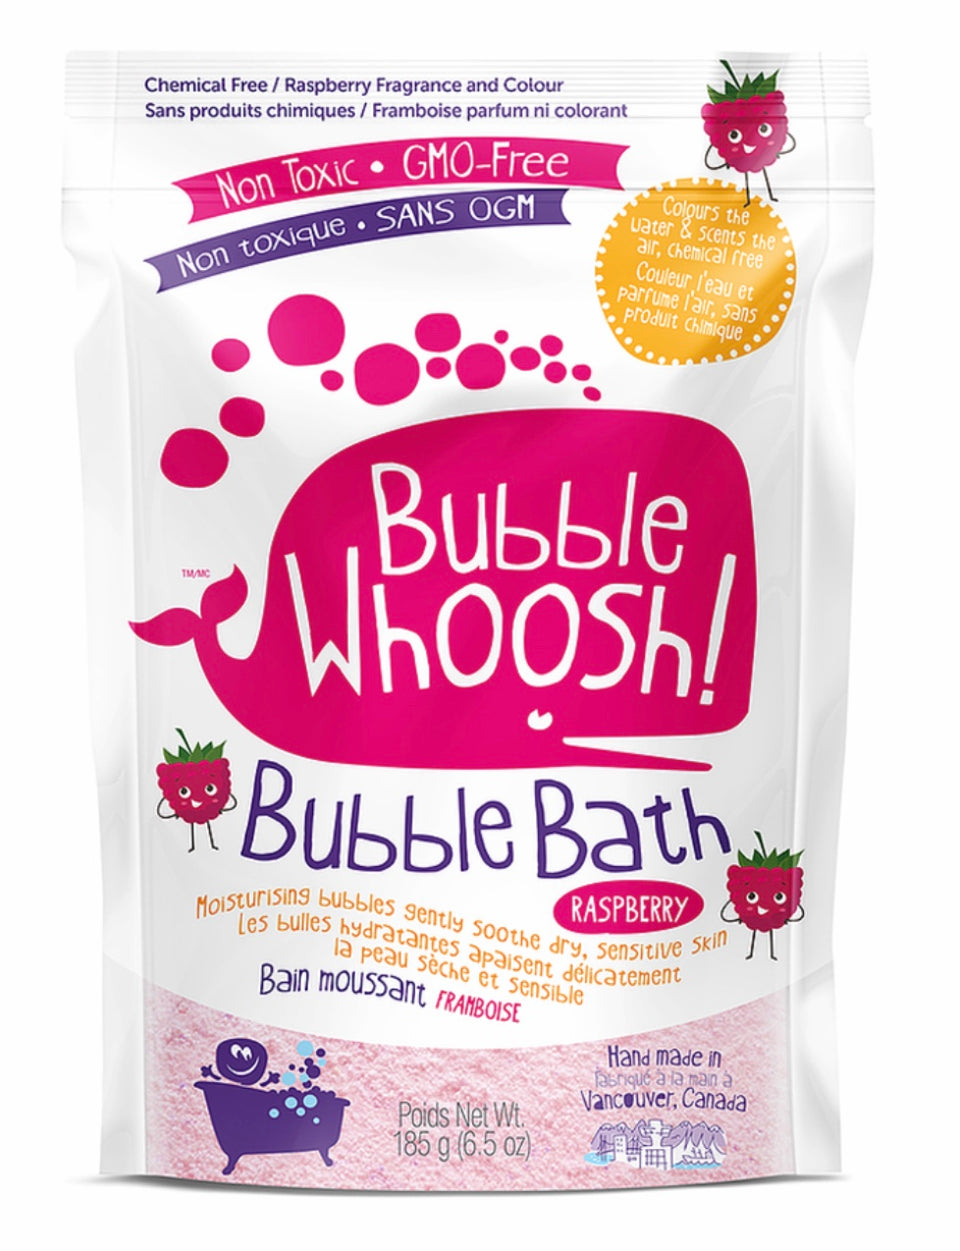 Bubble whoosh white package with pink whale on the front - bubble bath